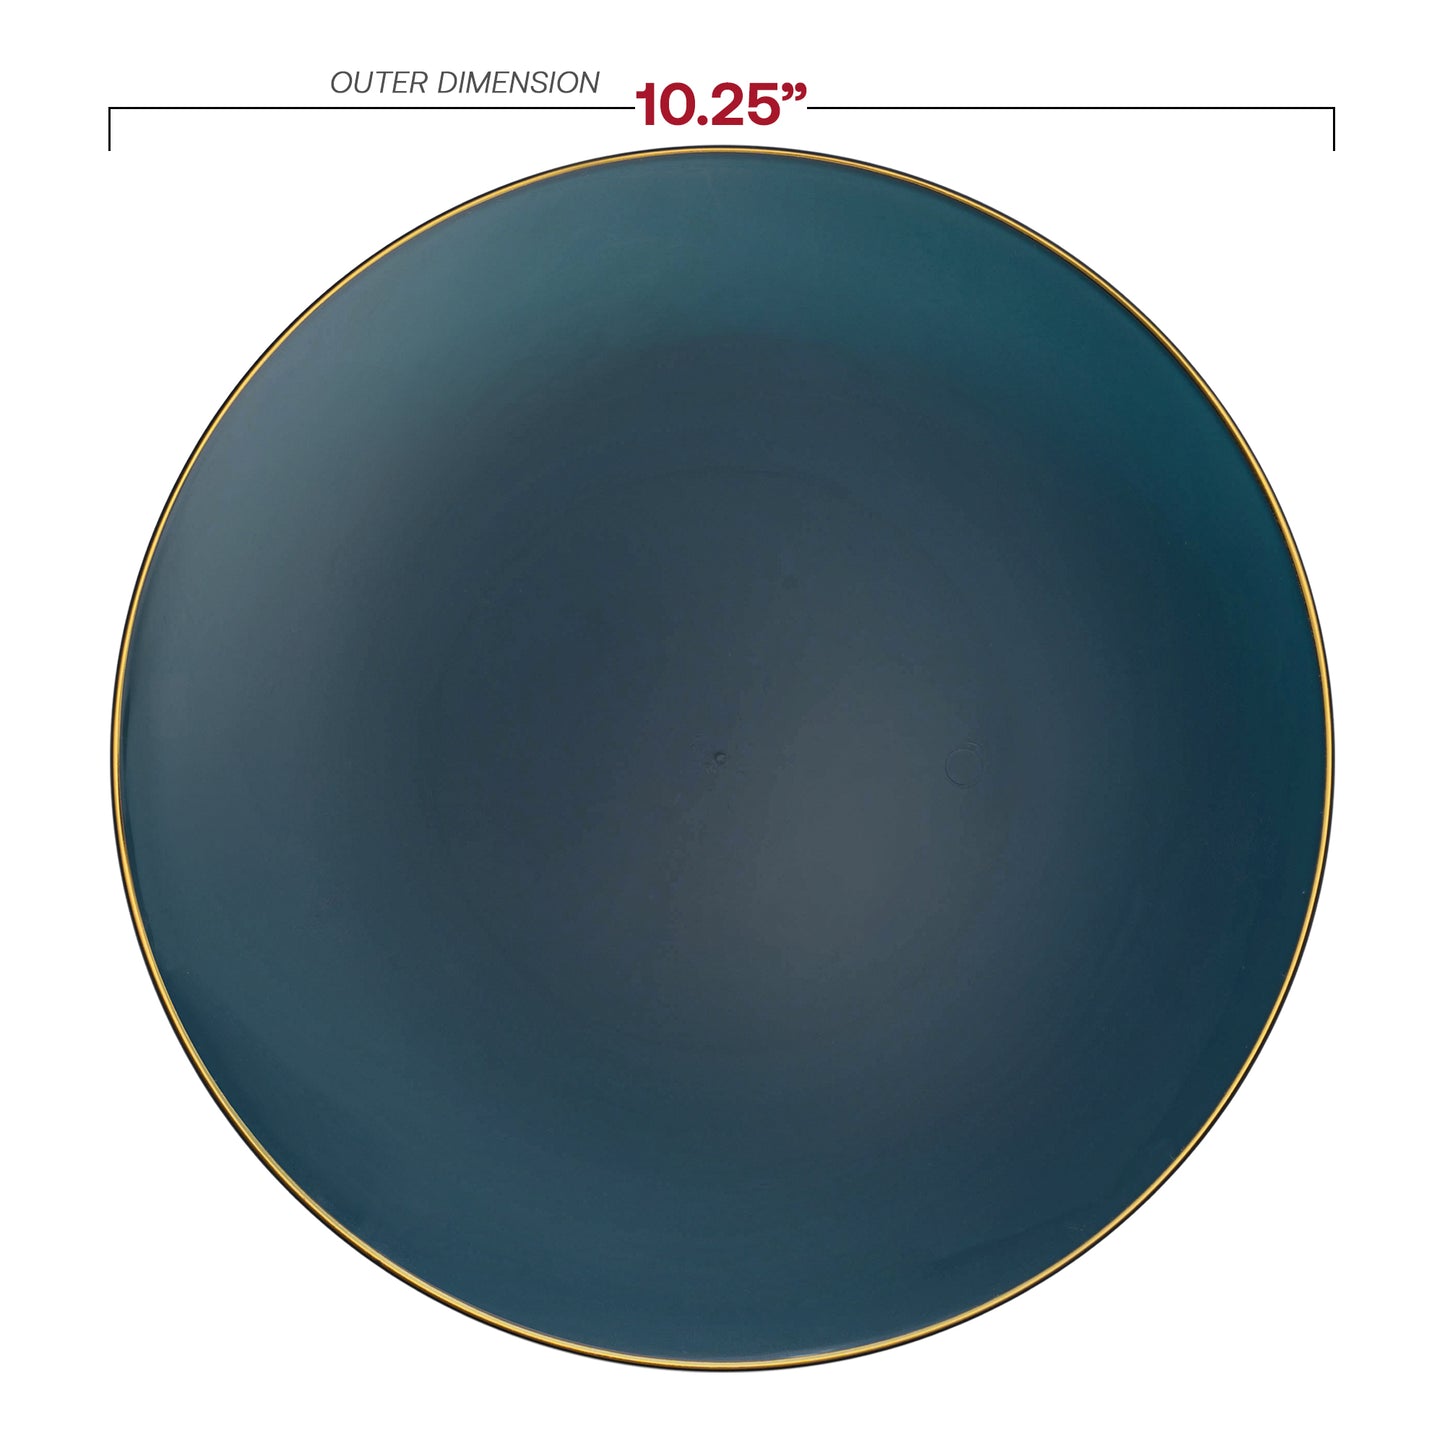 Navy with Gold Rim Organic Round Plastic Dinner Plates (10.25") Dimension | The Kaya Collection